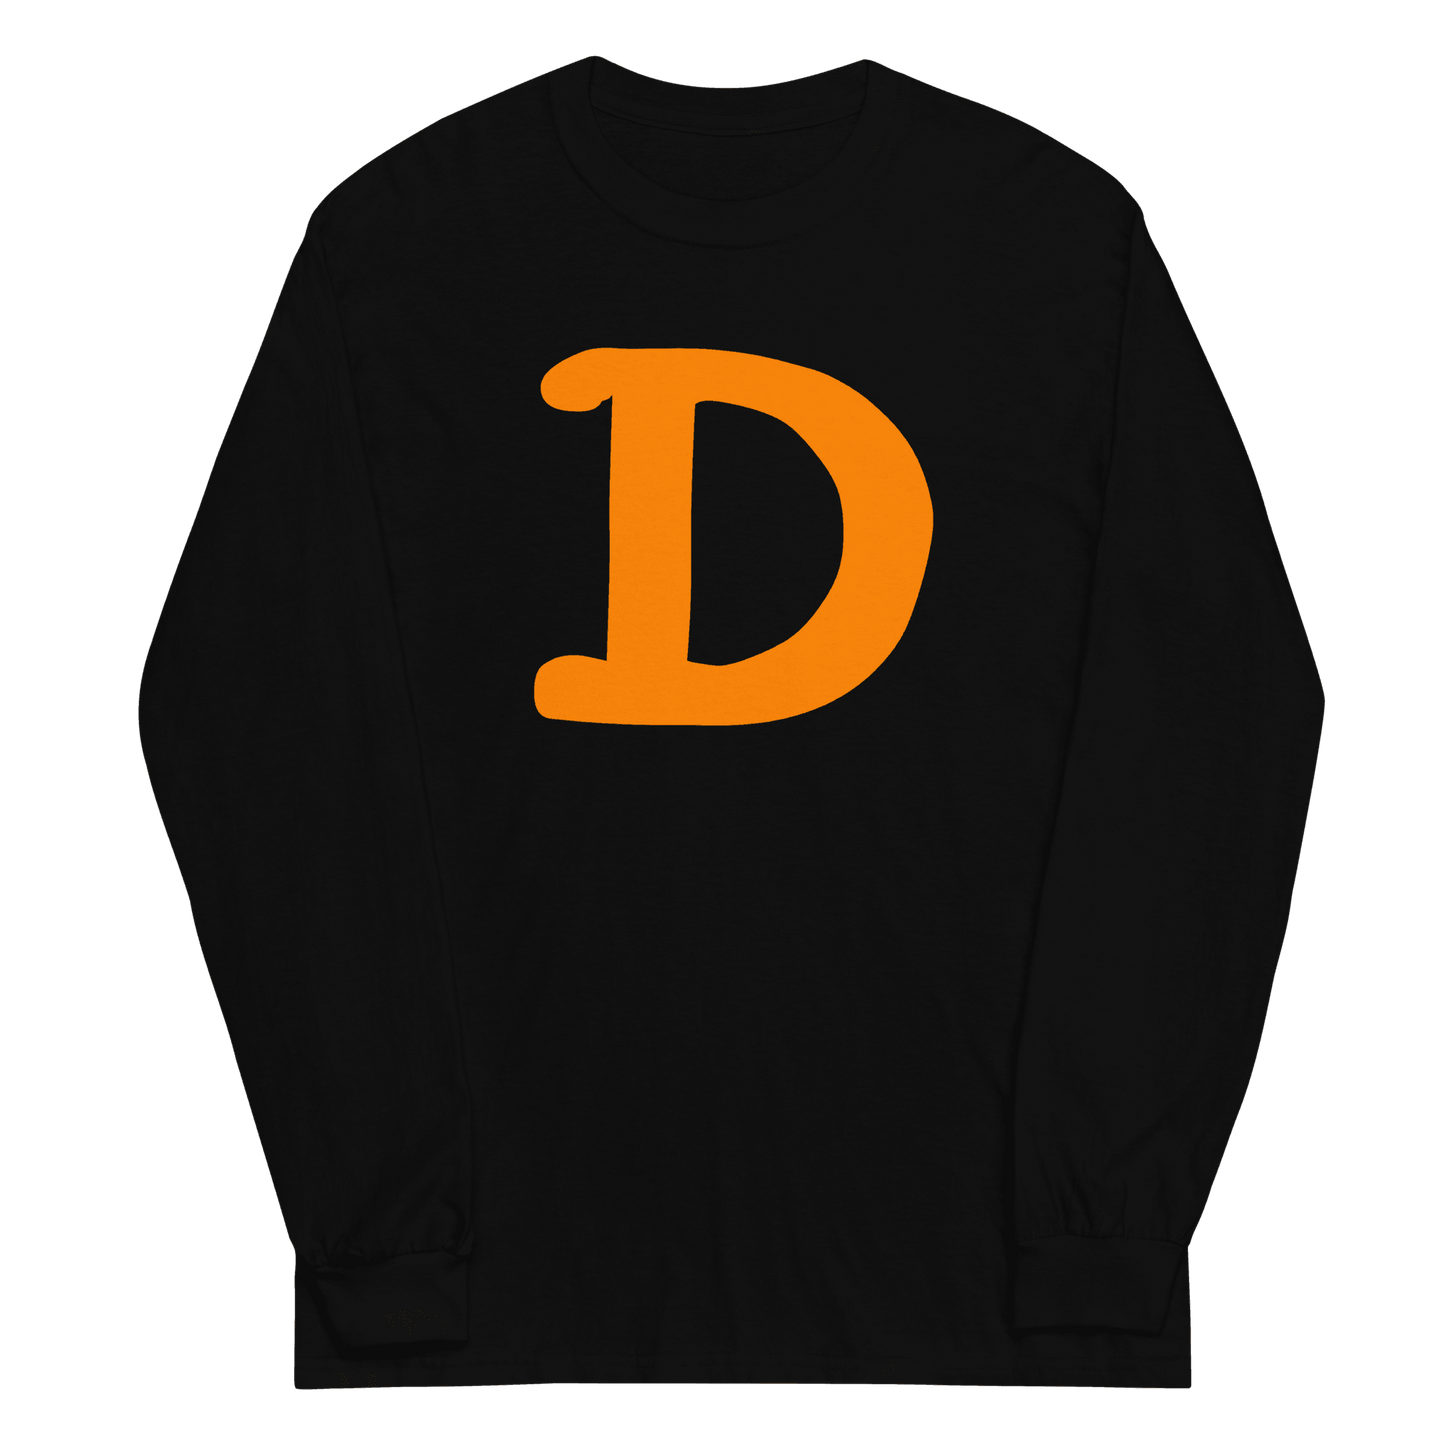 Detroit 'Old French D' T-Shirt (Orange Full Body Outline) | Unisex Long Sleeve - Circumspice Michigan